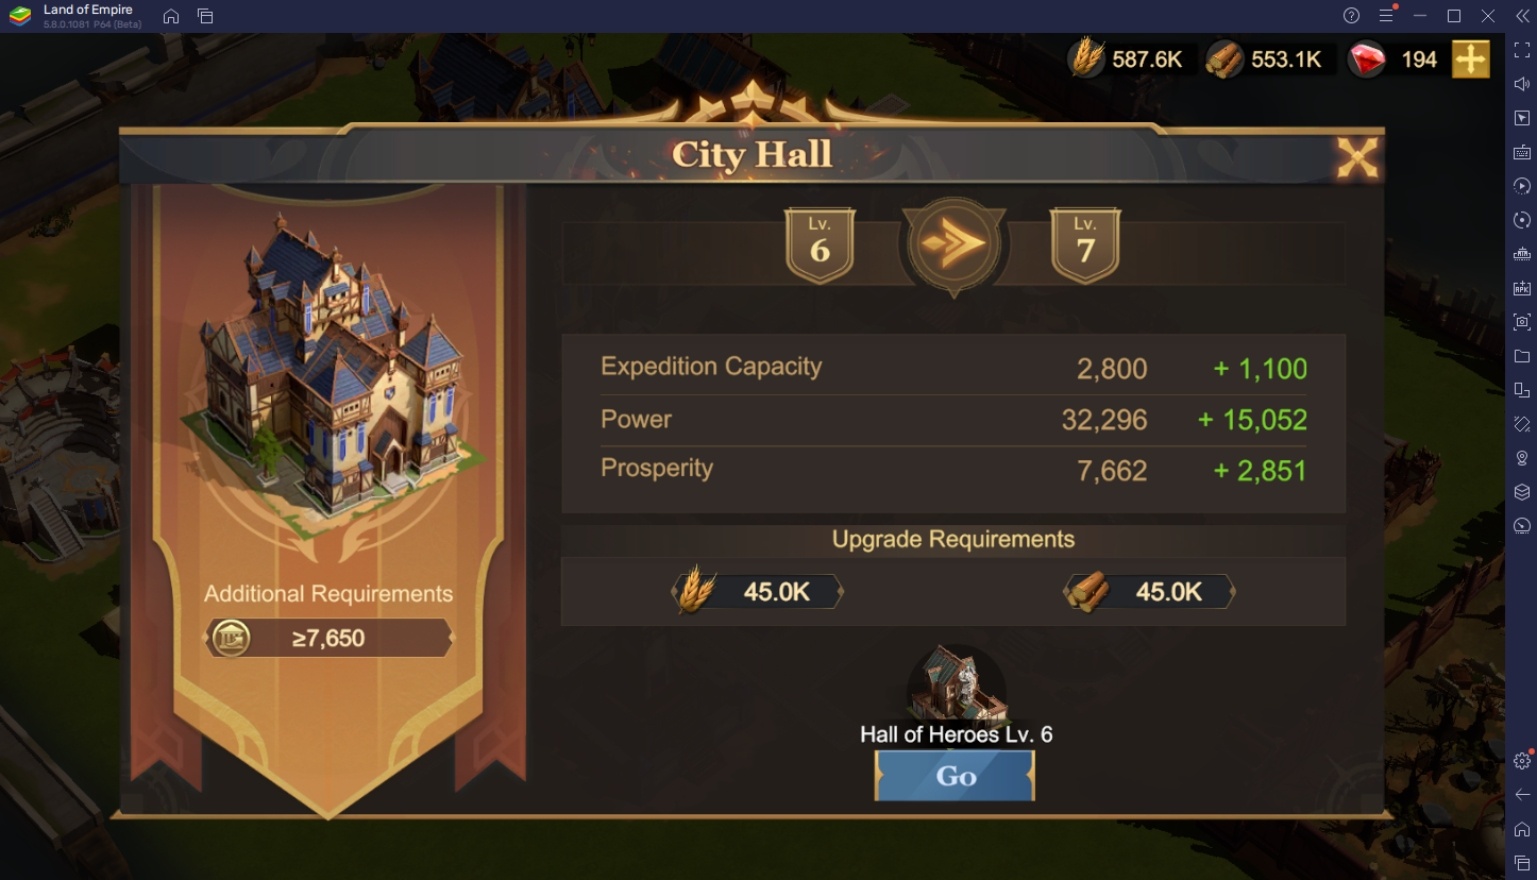 BlueStacks' Beginners Guide to Playing Land of Empires: Immortal